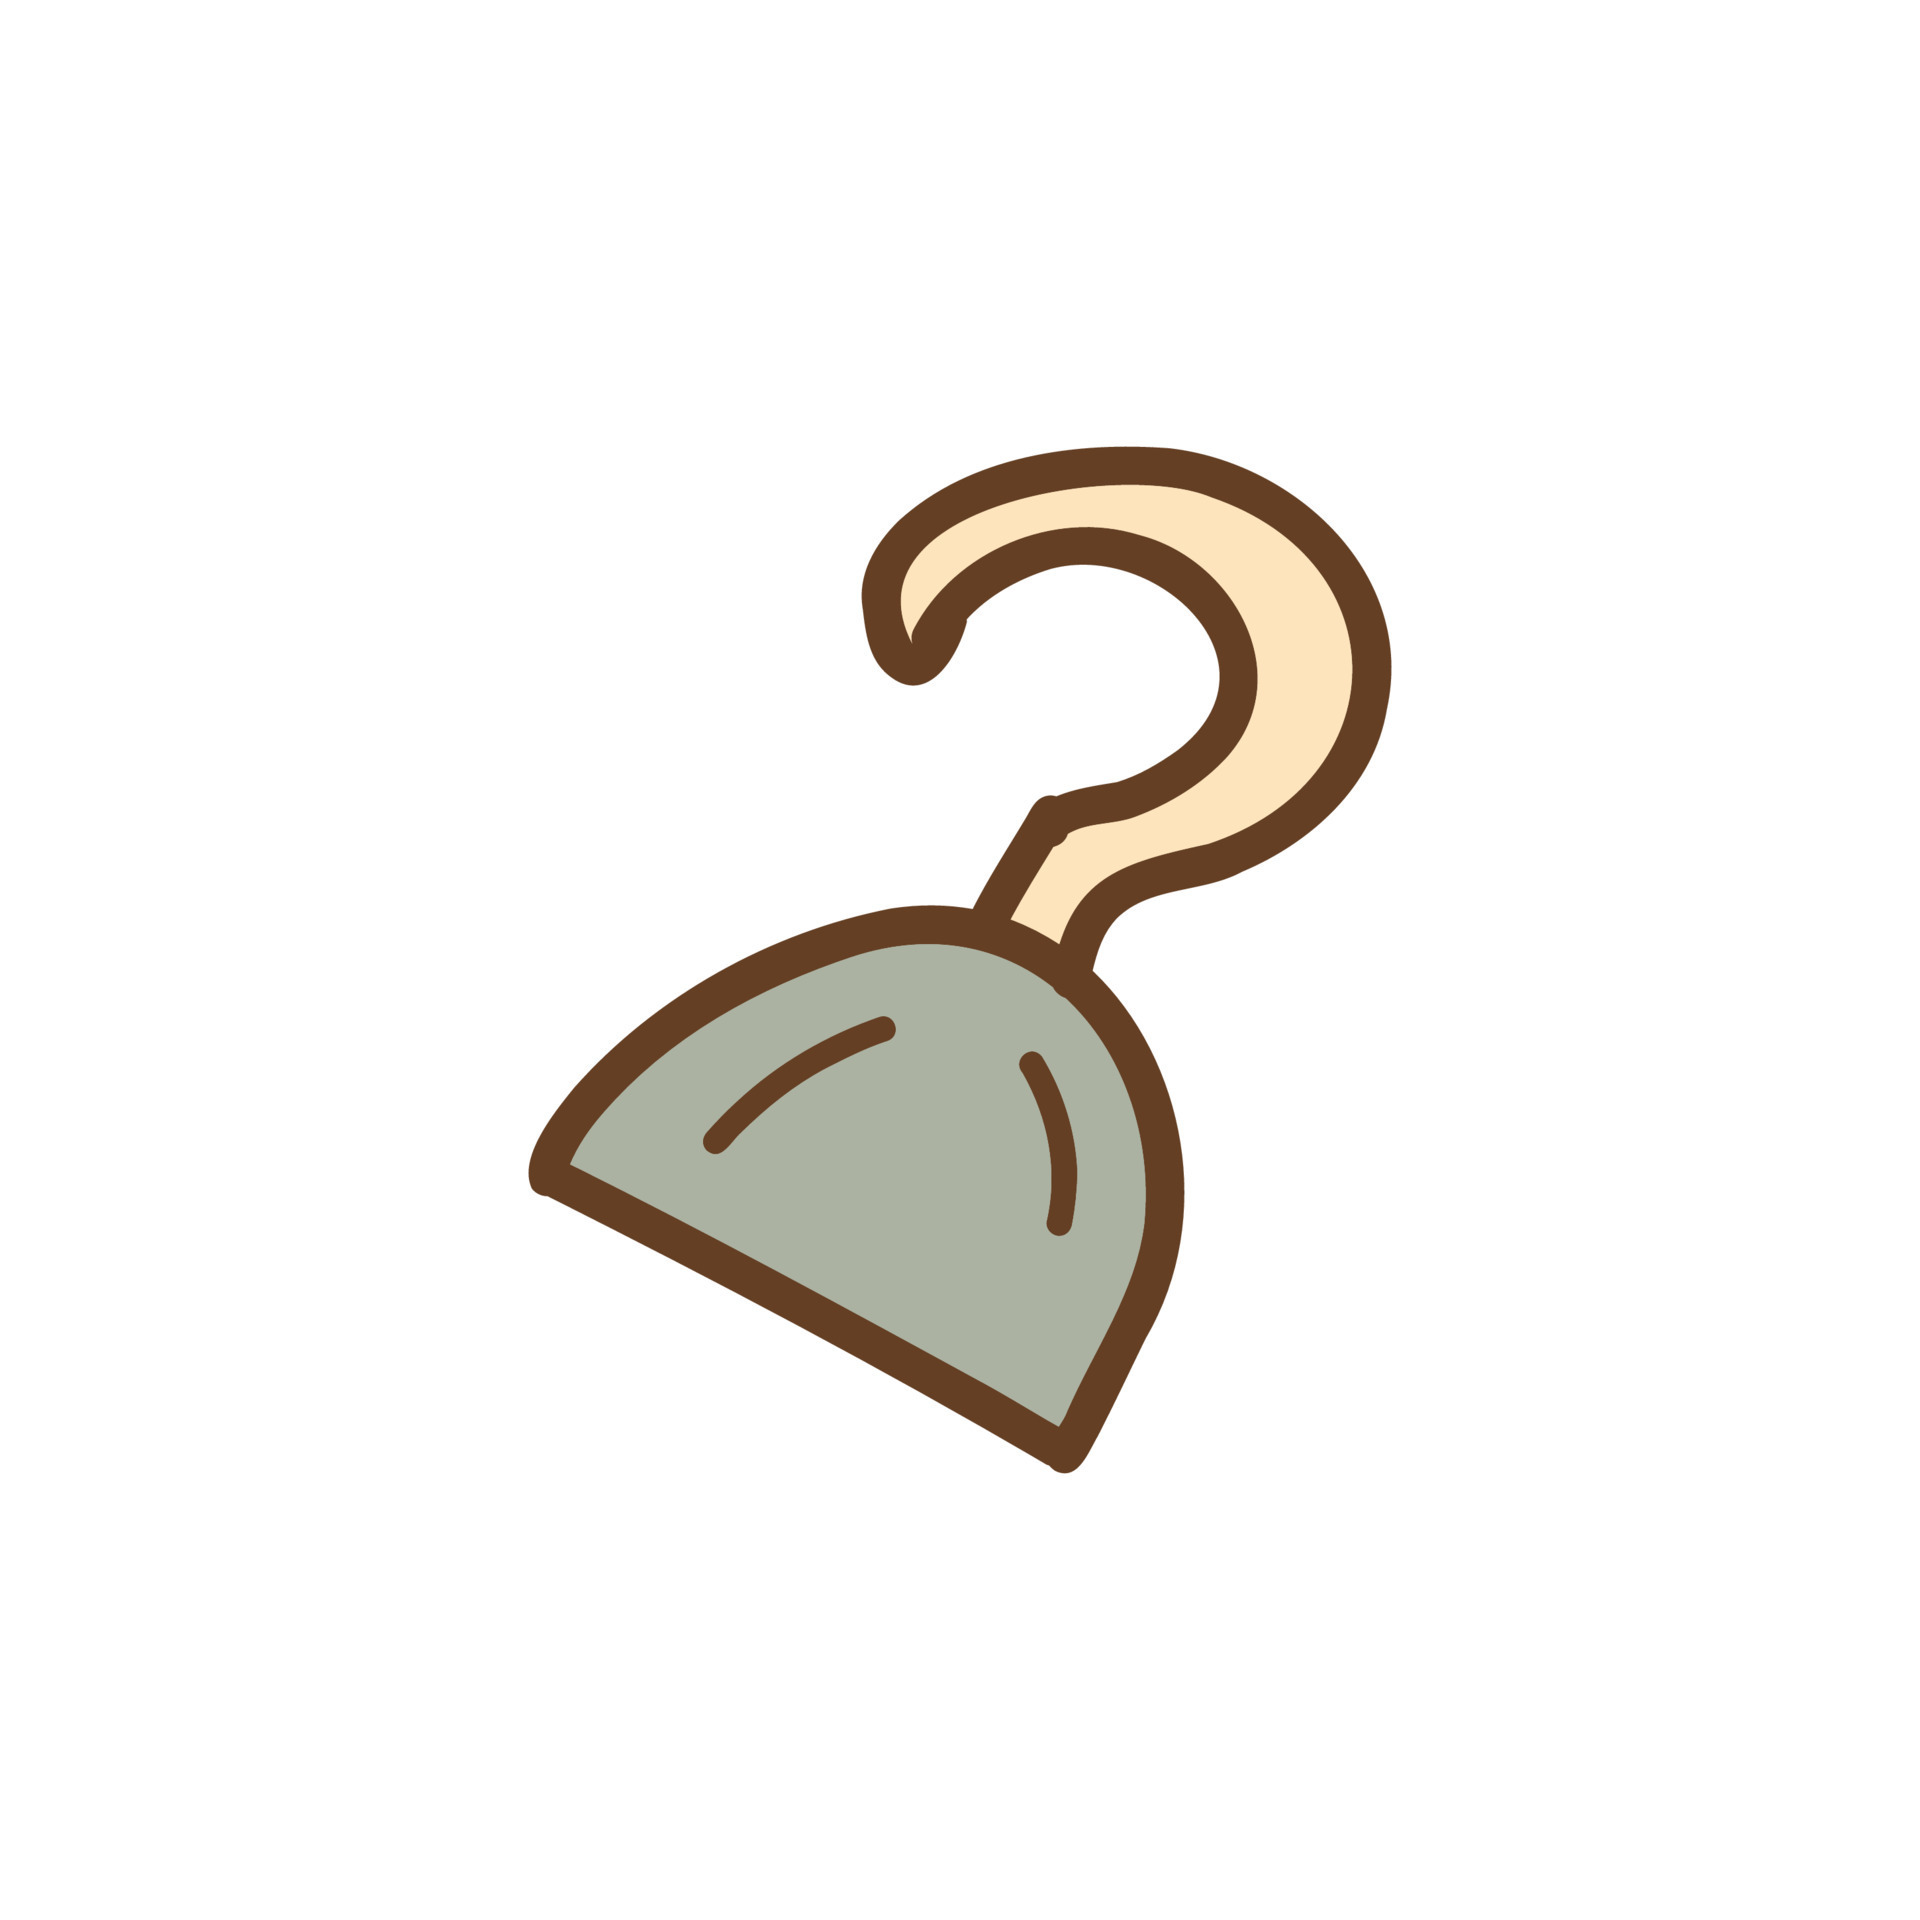 https://static.vecteezy.com/system/resources/previews/016/269/881/original/pirate-hook-silver-sharp-prosthesis-tool-hand-drawn-vector.jpg